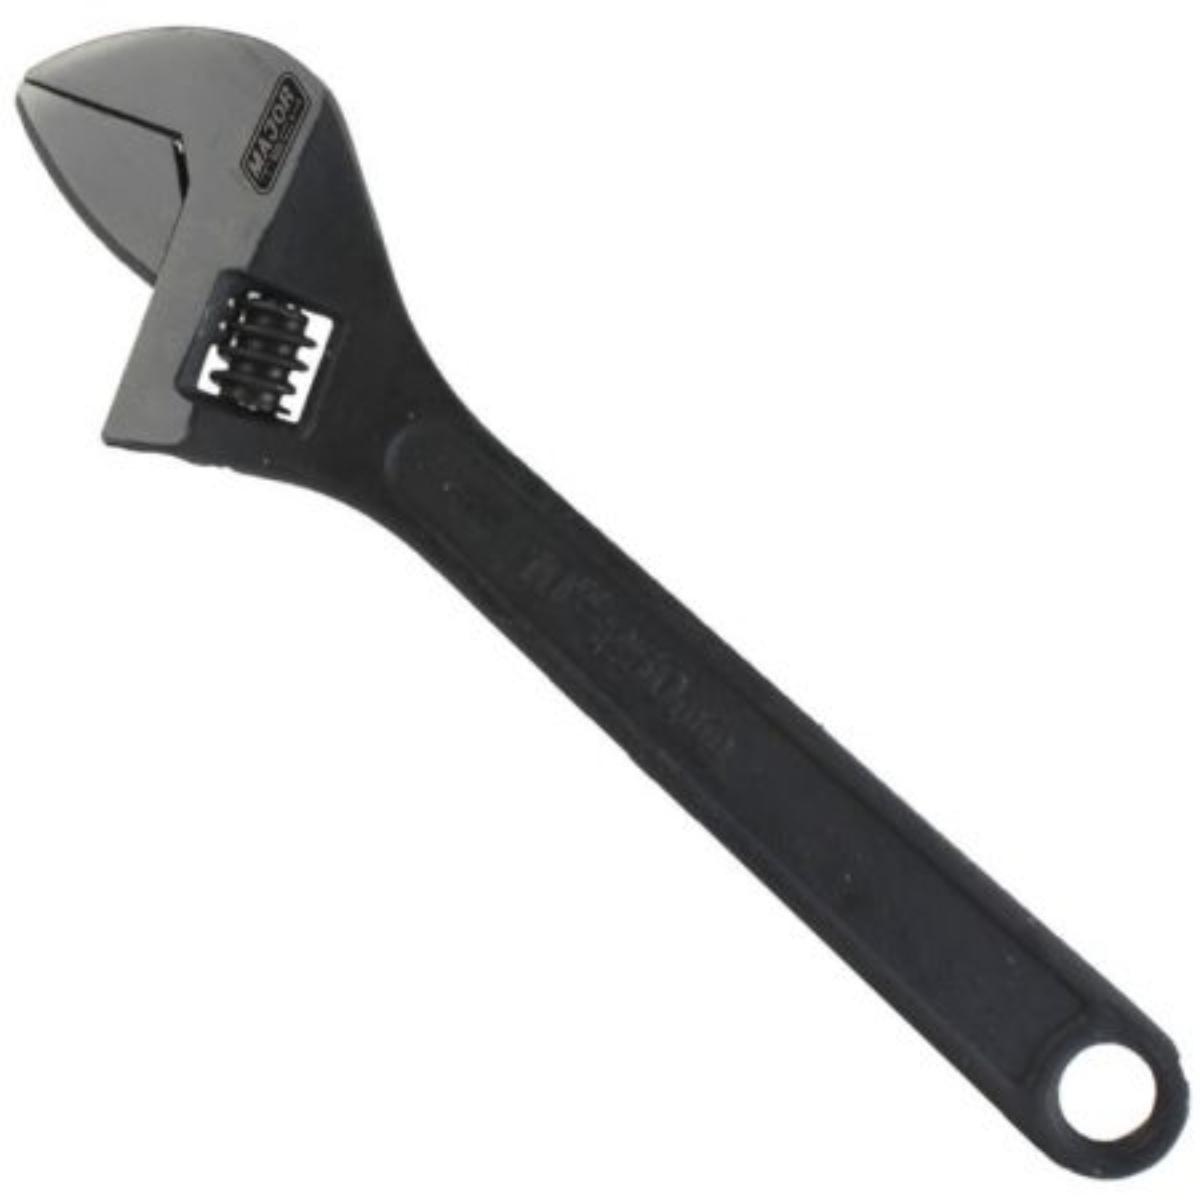 ADJUSTABLE WRENCH SPANNER 250mm 10IN